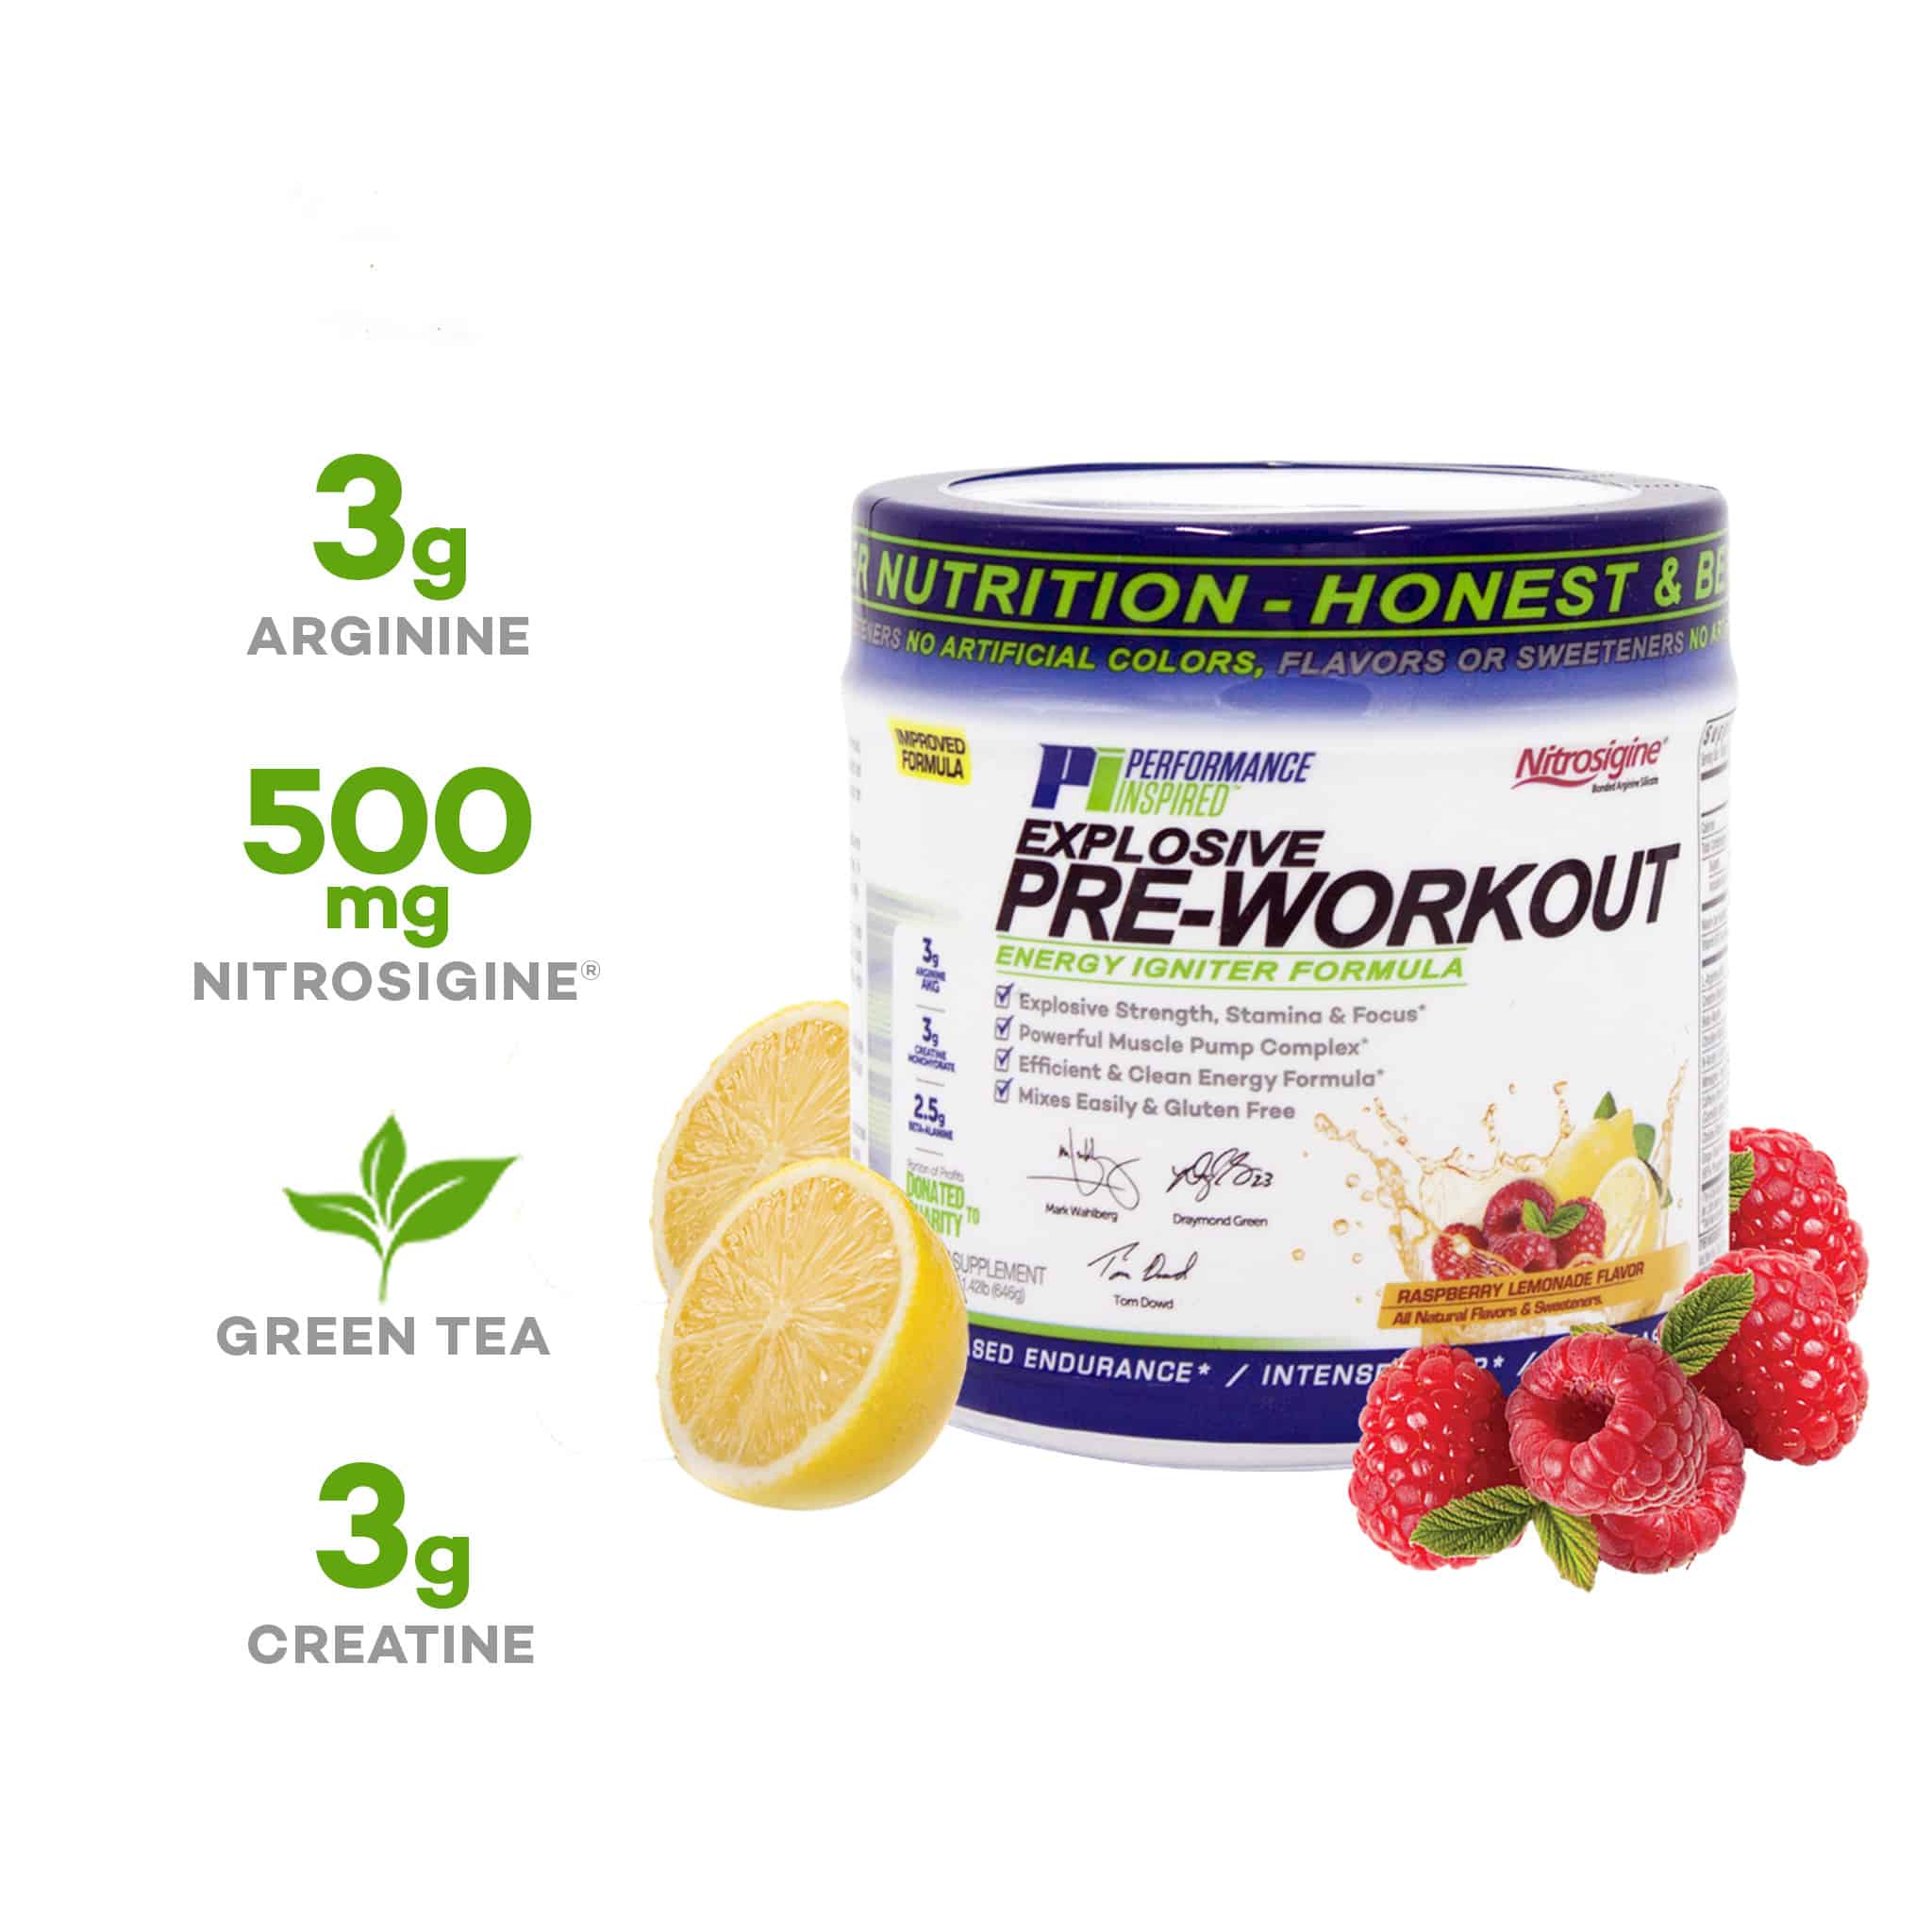 Pre-Workout Energy Formula – Performance Inspired Nutrition